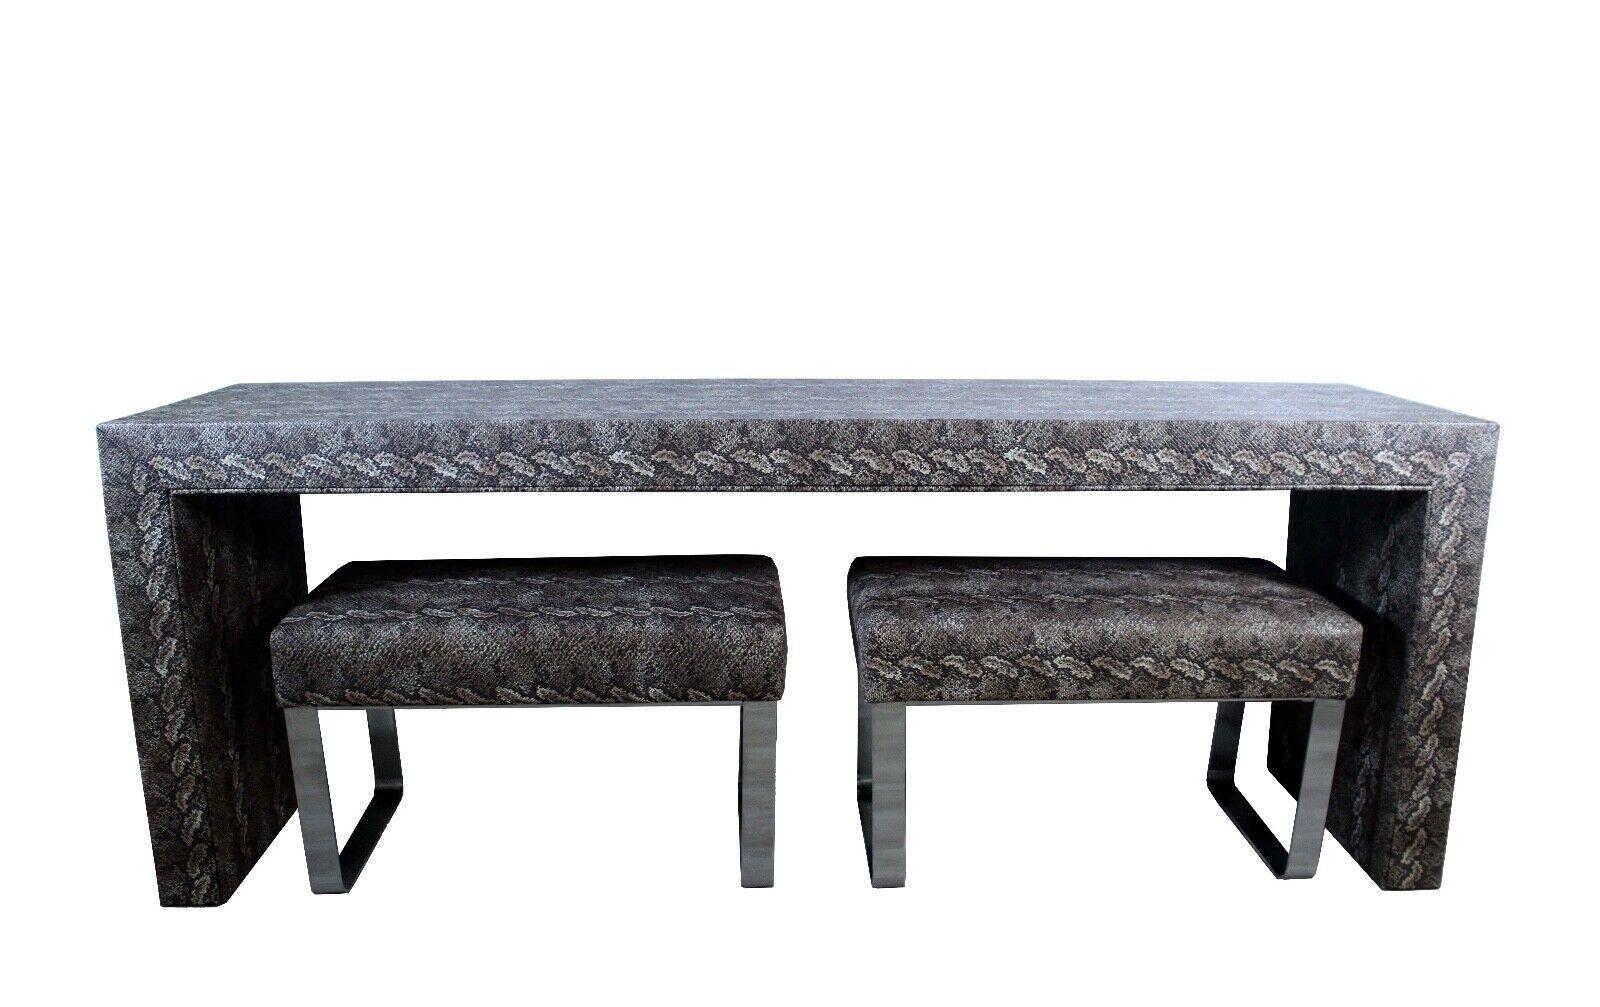 These stunning faux python covered ottomans are sure to be a conversation piece in any room. The ottomans are made of a durable chrome construction with a faux python patterned fabric covering. Perfect for a living room, entryway, or bedroom, this